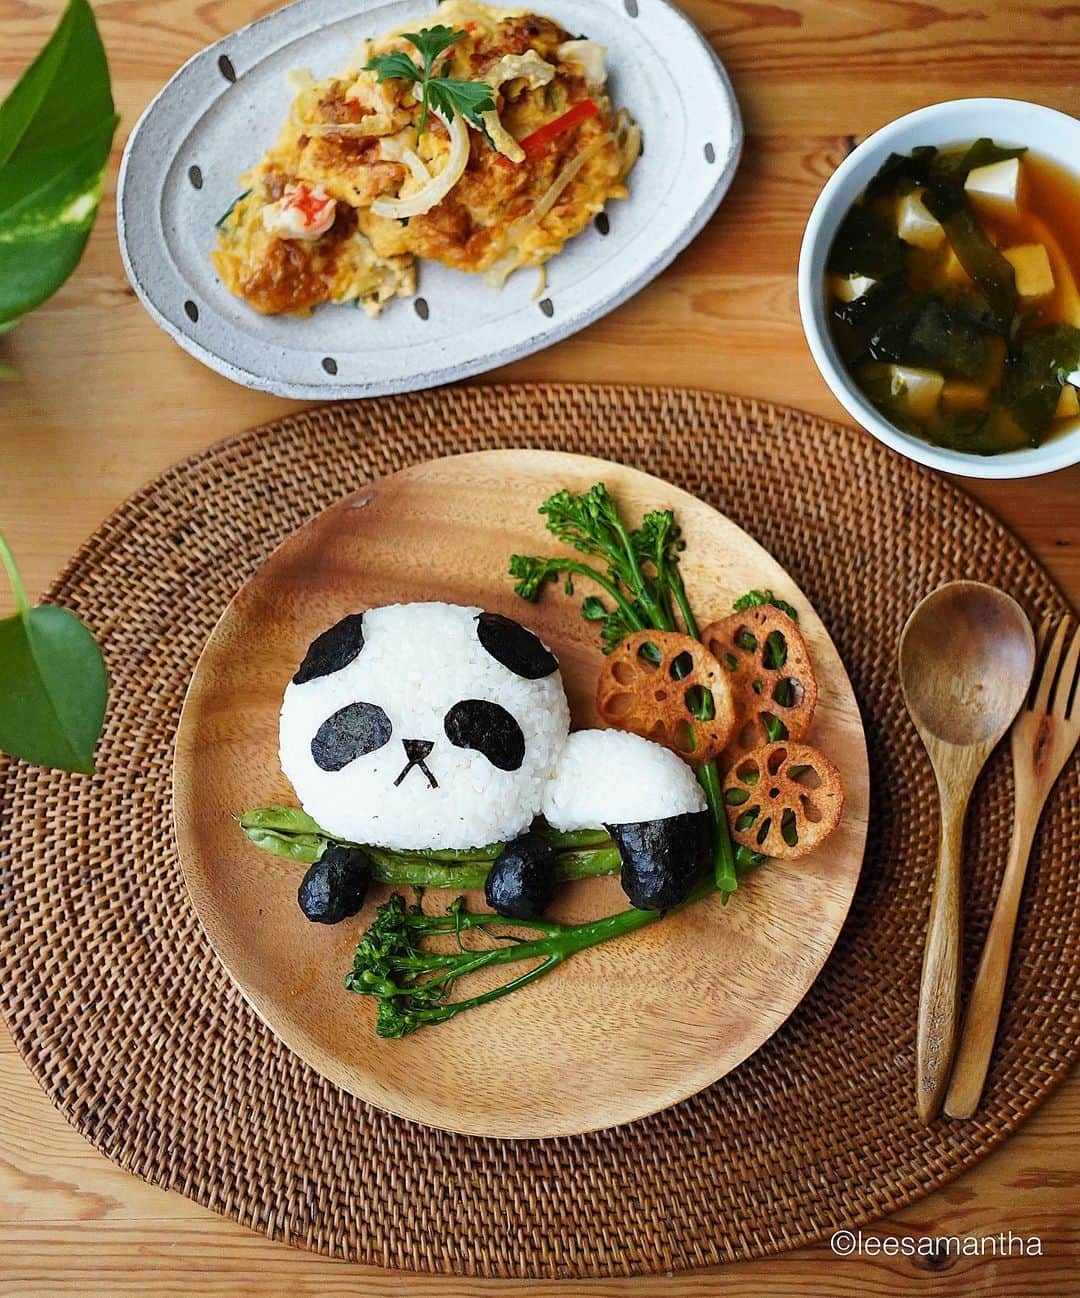 Samantha Leeのインスタグラム：「There are always new ways to make meals more enjoyable - both for my children and for me. If I’m having fun cooking it, they will have fun as well. 🧡From Samantha with Heart.  What are some of the things you do #withheart? As part of their 50th anniversary, @shangrilahotels is offering a chance to win up to 65,000 Golden Circle Award Points for an array of exclusive Shangri-La experiences. All you have to do is post a moment on your IG feed that reflects your story that lies behind your passions and don't forget to tag @shangrilahotels #withheart #shangrila50 #myshangrila . Learn more: https://bit.ly/ShangriLa50withheart_7」